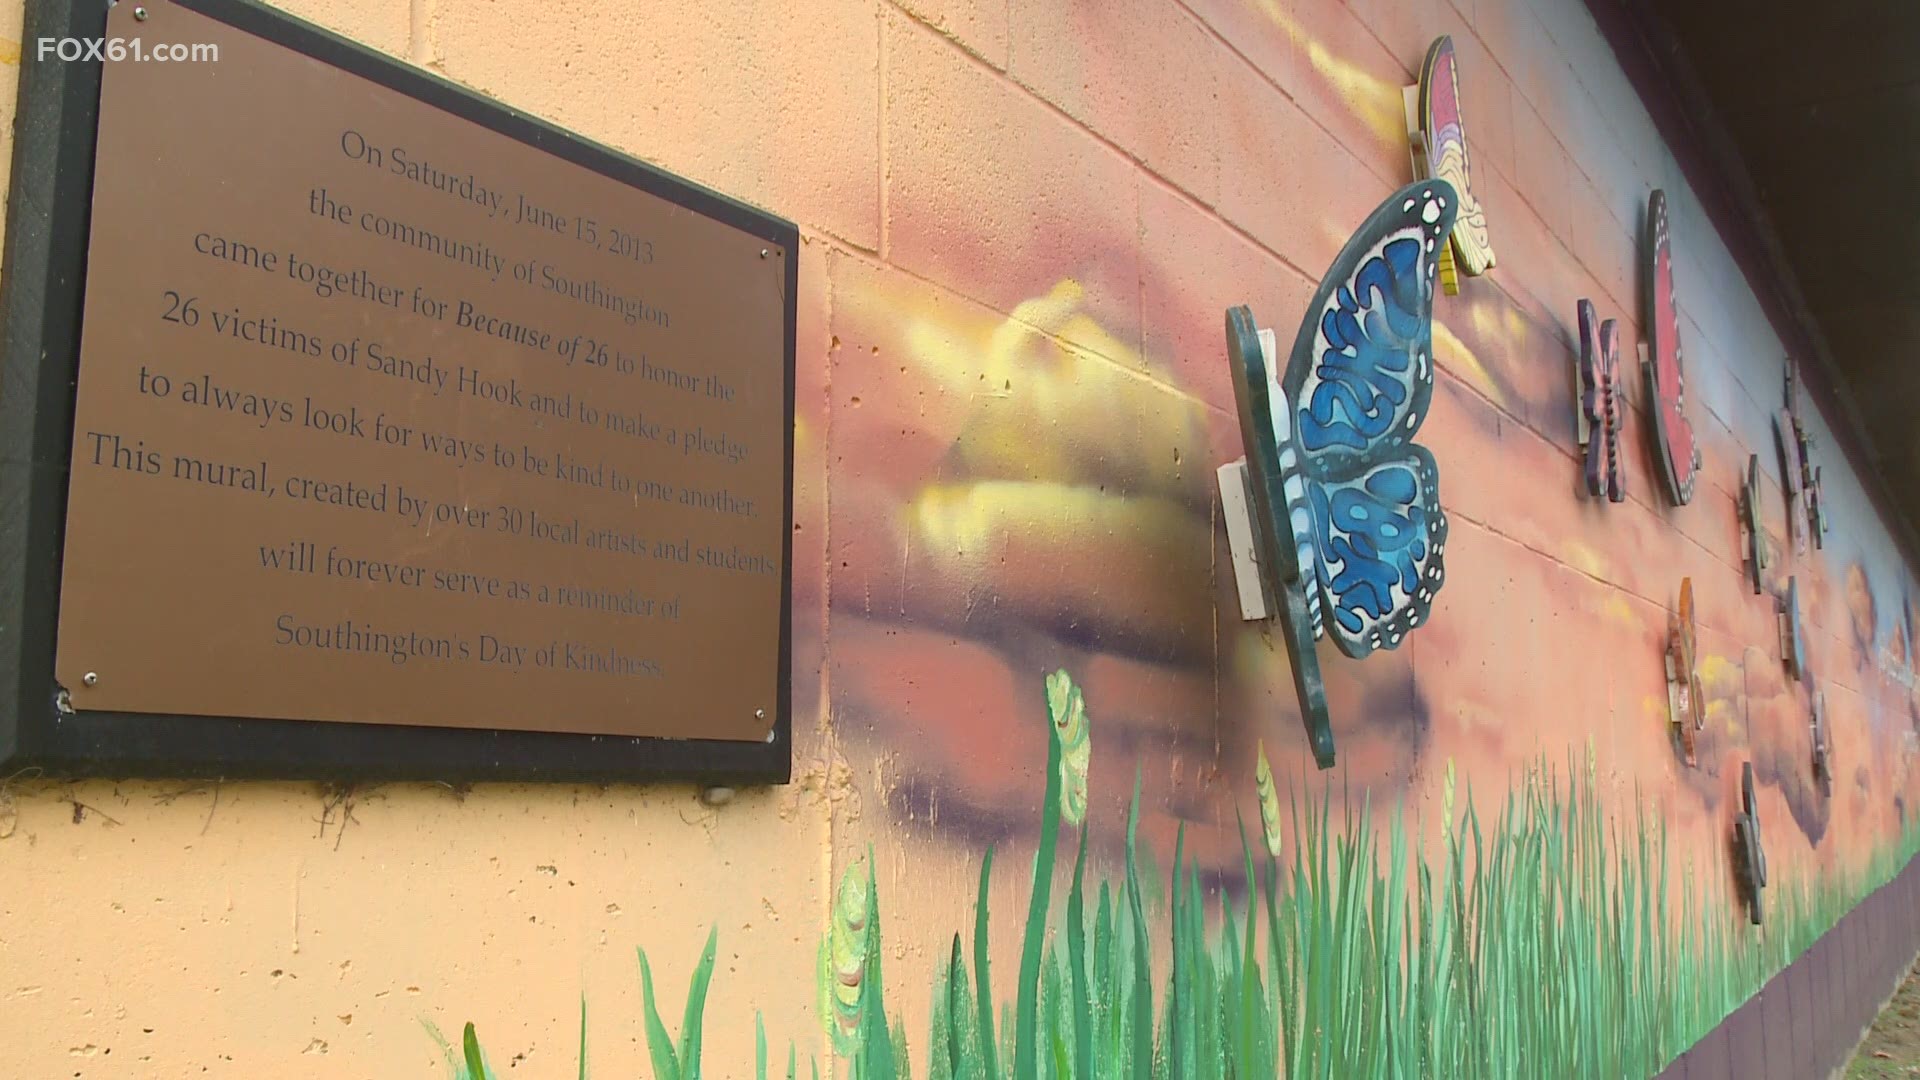 Police said Cavallo and Lombardi used spray paint to cover the mural and butterflies representing the victims. Both turned themselves into Southington PD on Tuesday.